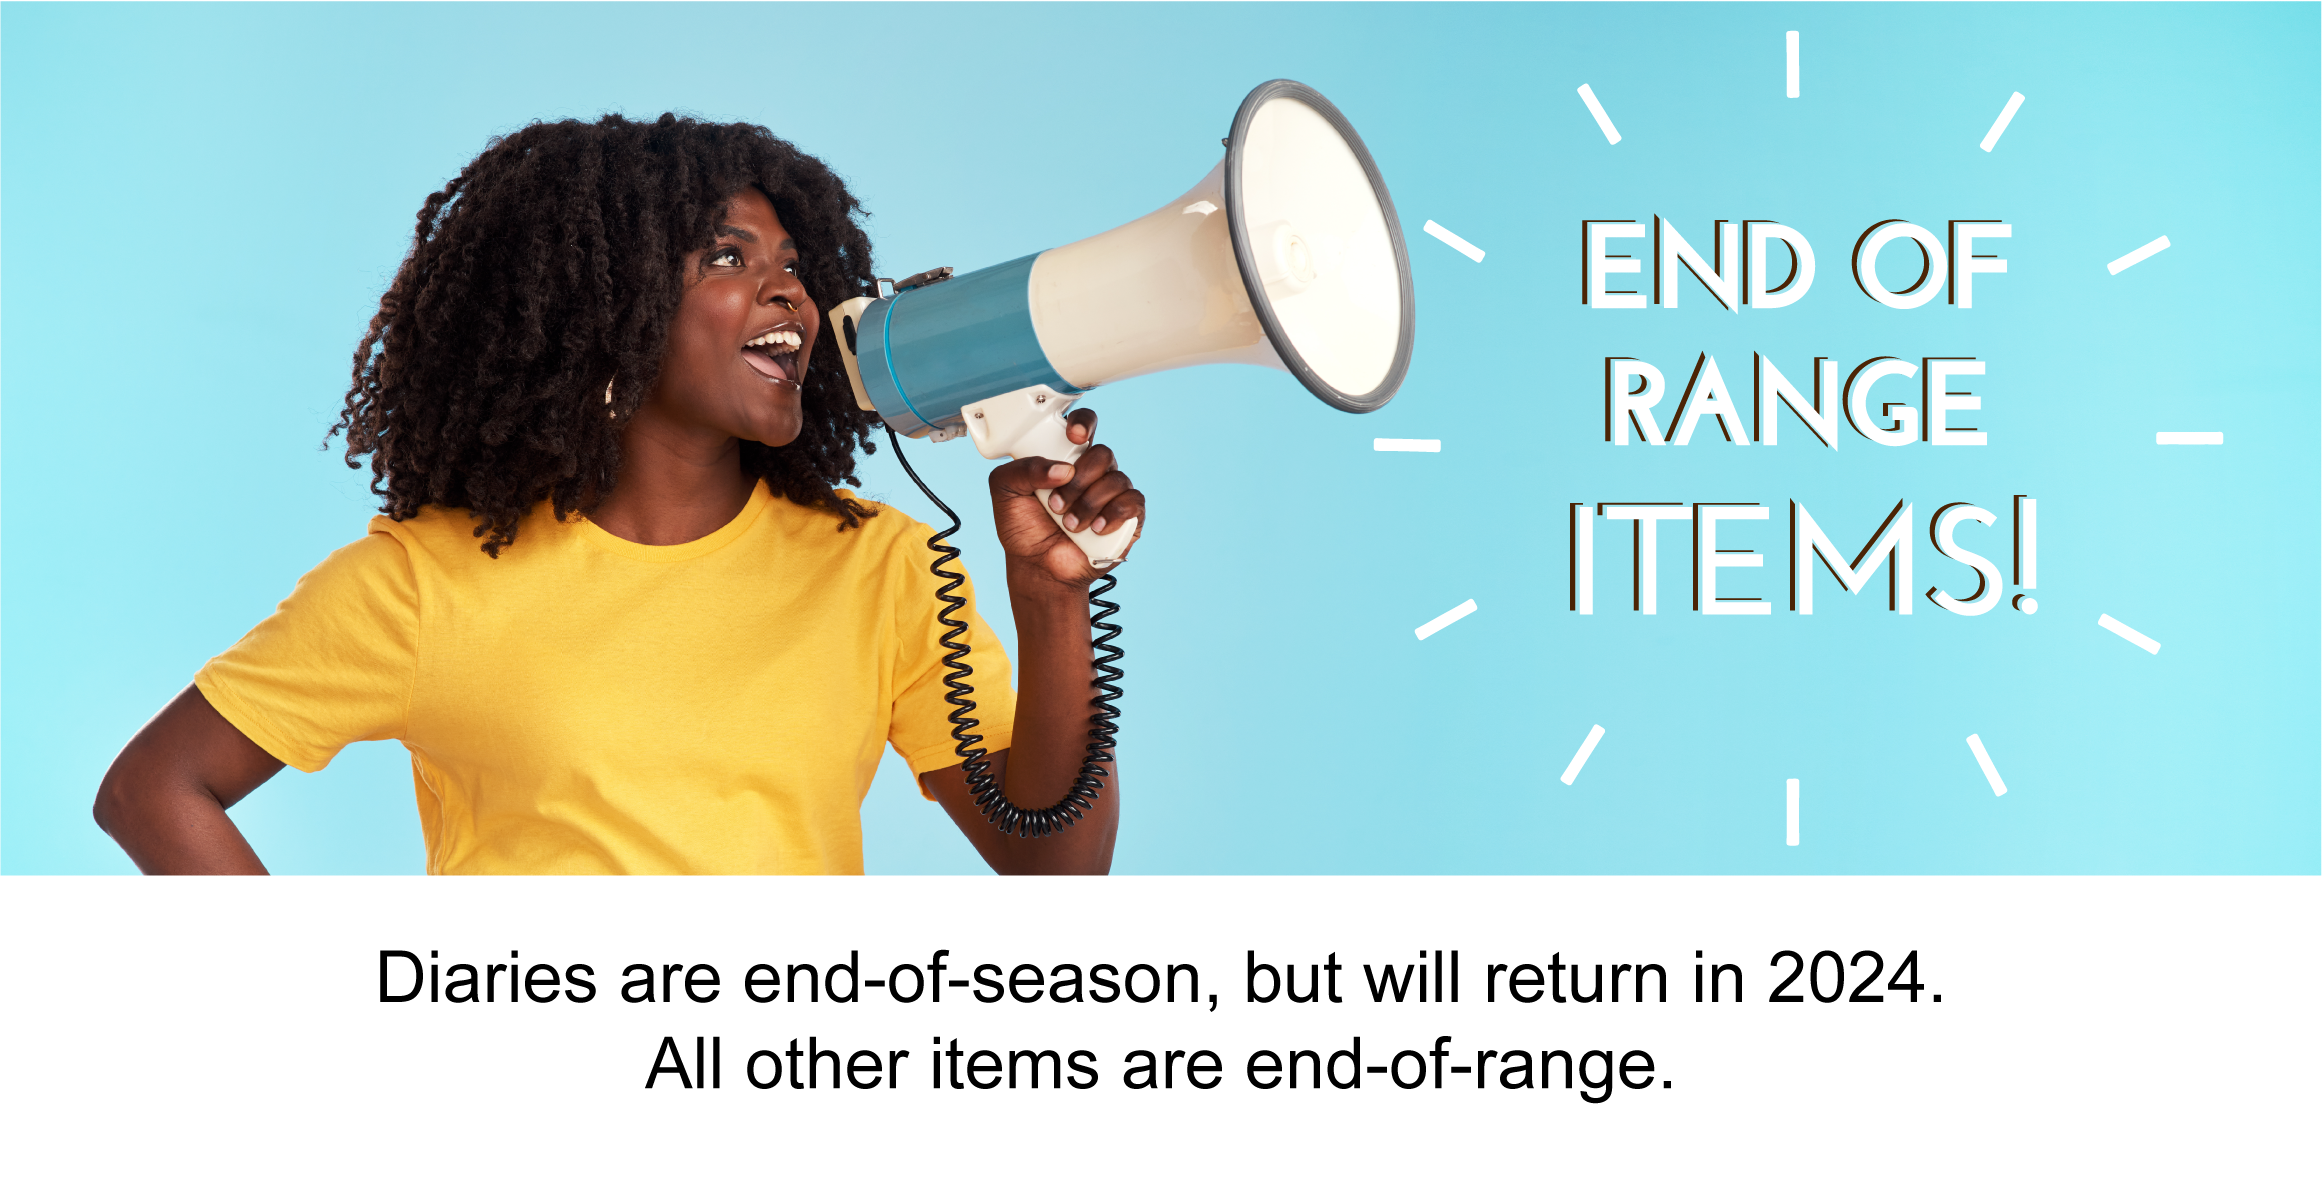 Image shows a woman with a megaphone shouting 'end of range items!'